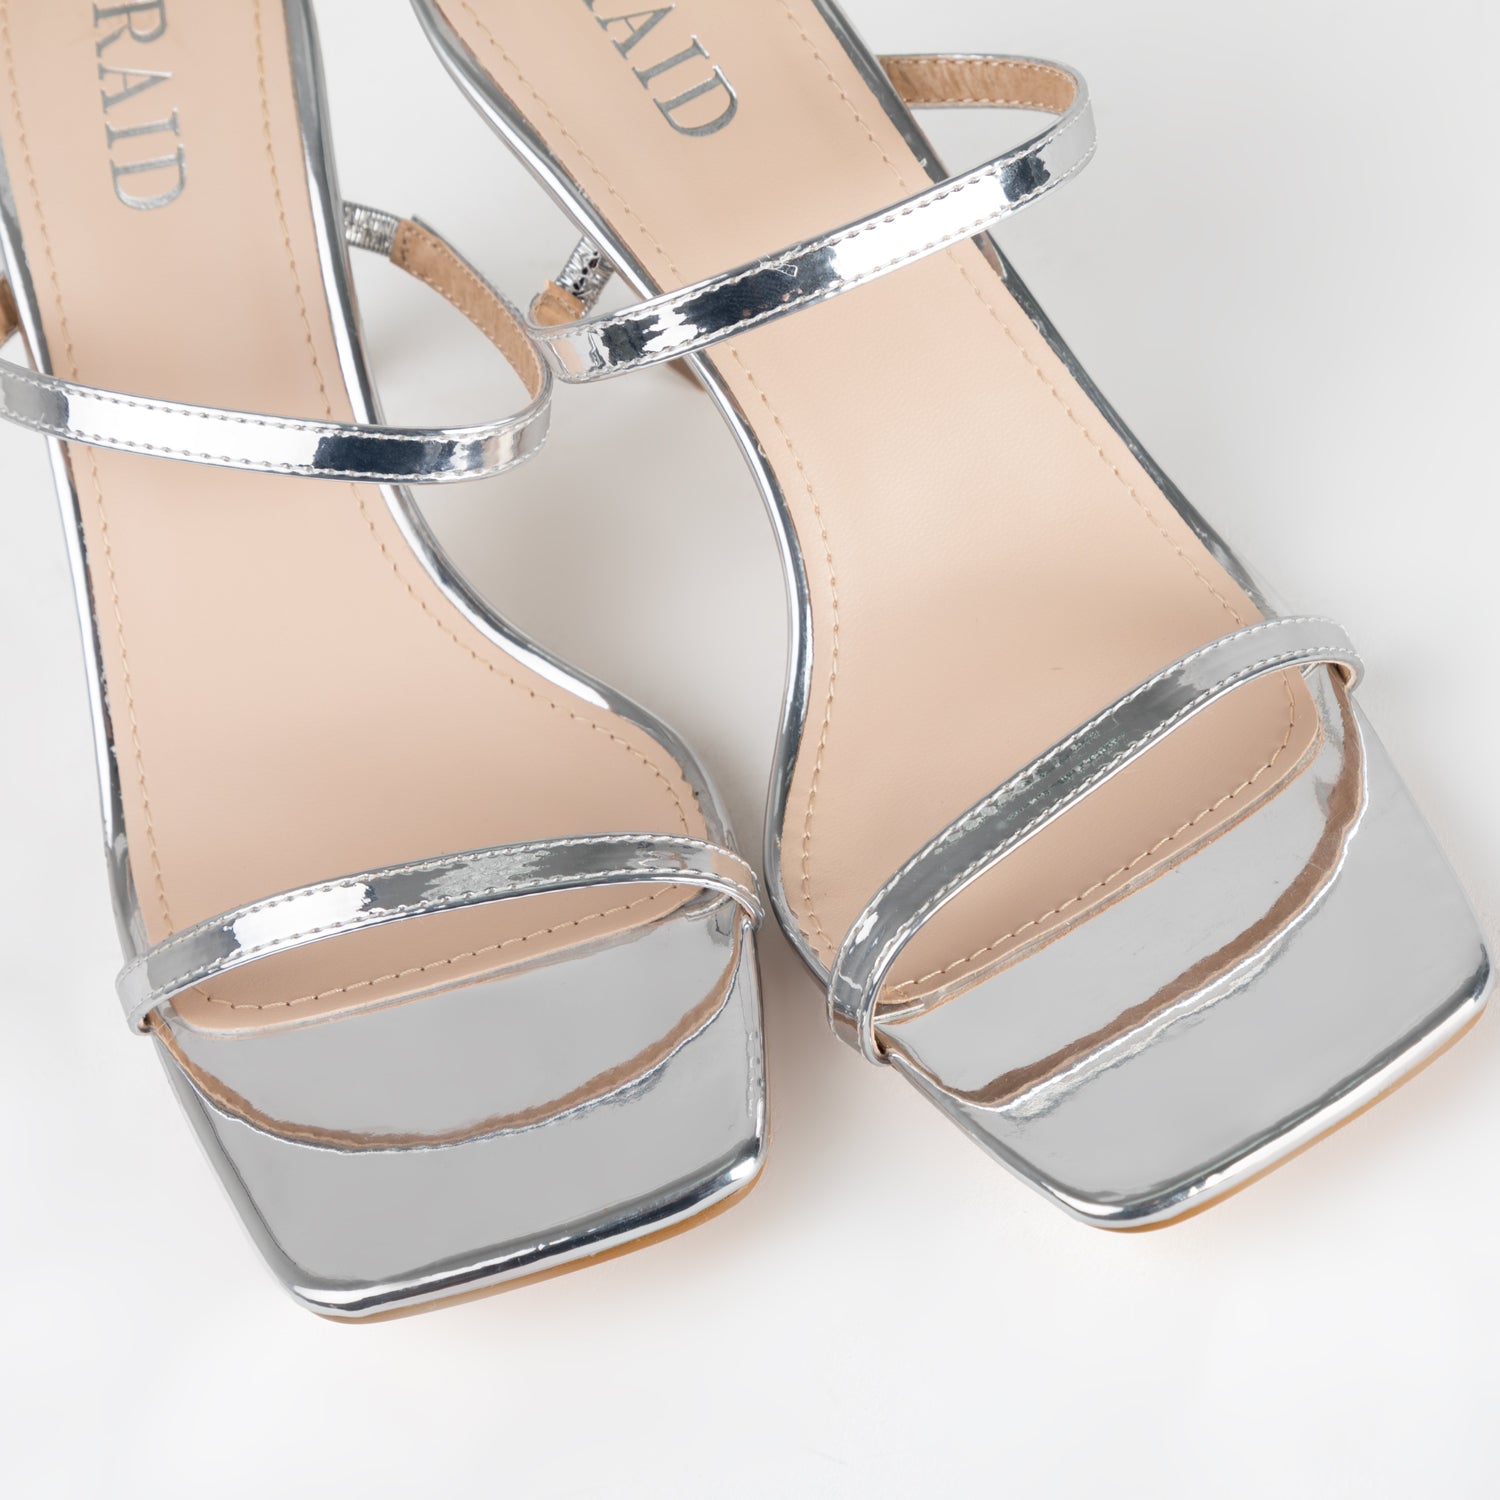 RAID Audley Heeled Mules in Silver Metallic